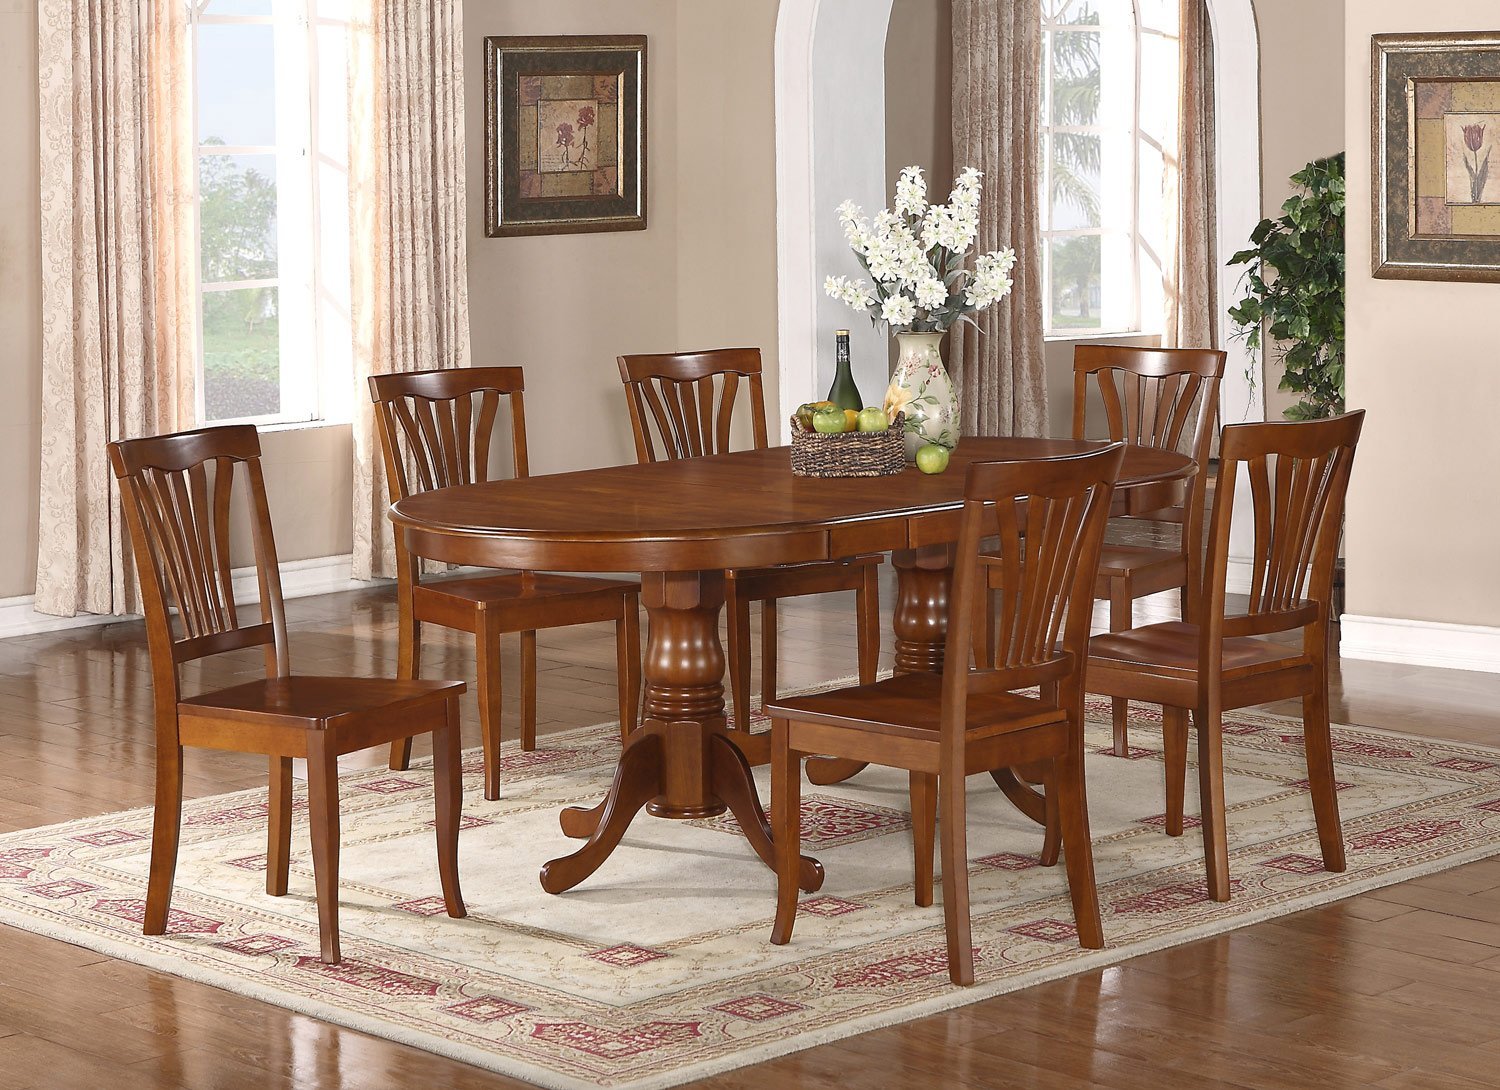 7-PC Newton Oval Dining Room Set Table + 8 Wood Seat Chairs in Saddle